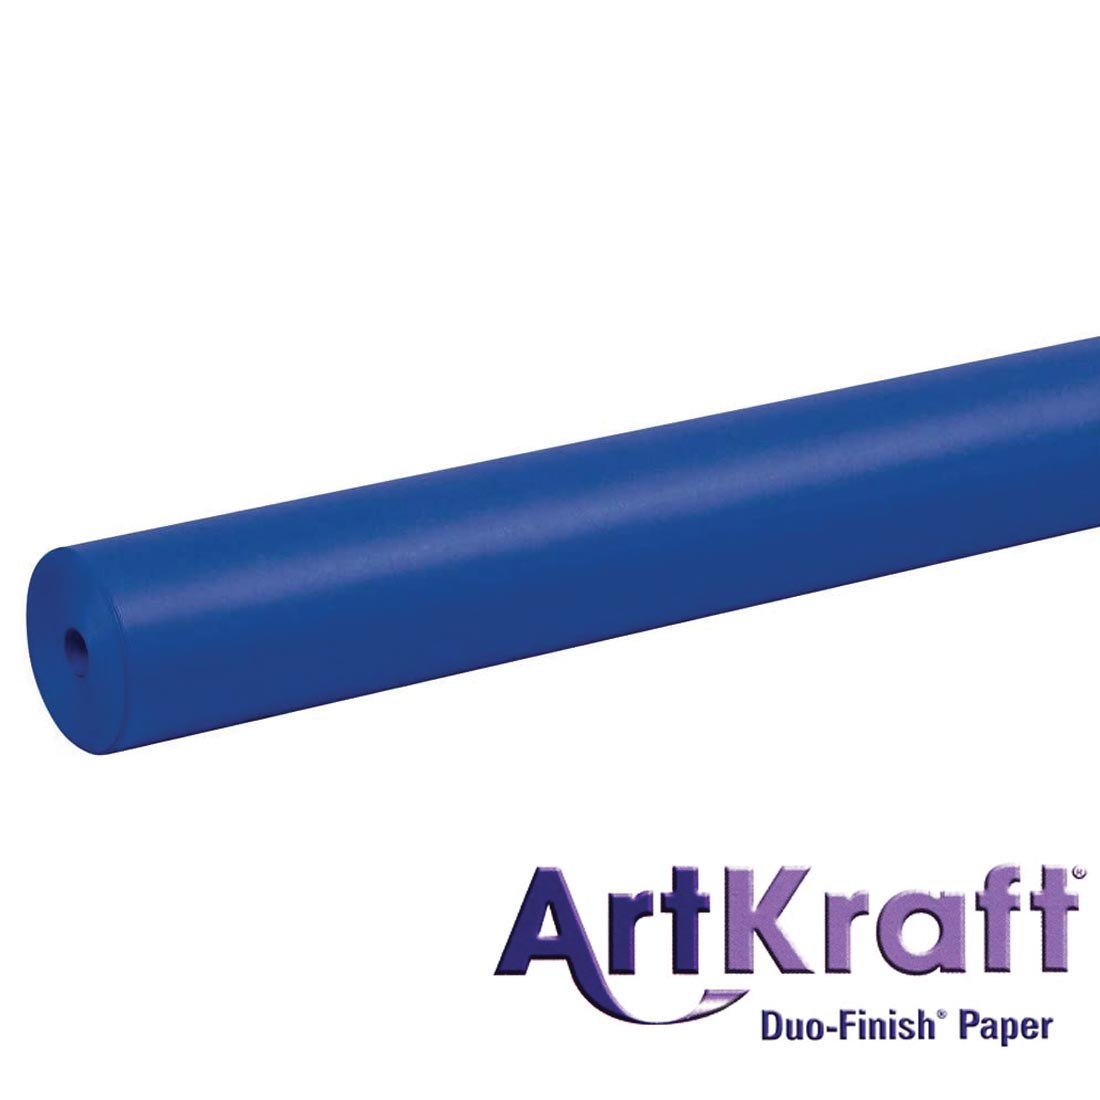 Roll of Royal Blue Paper with text ArtKraft Duo-Finish Paper